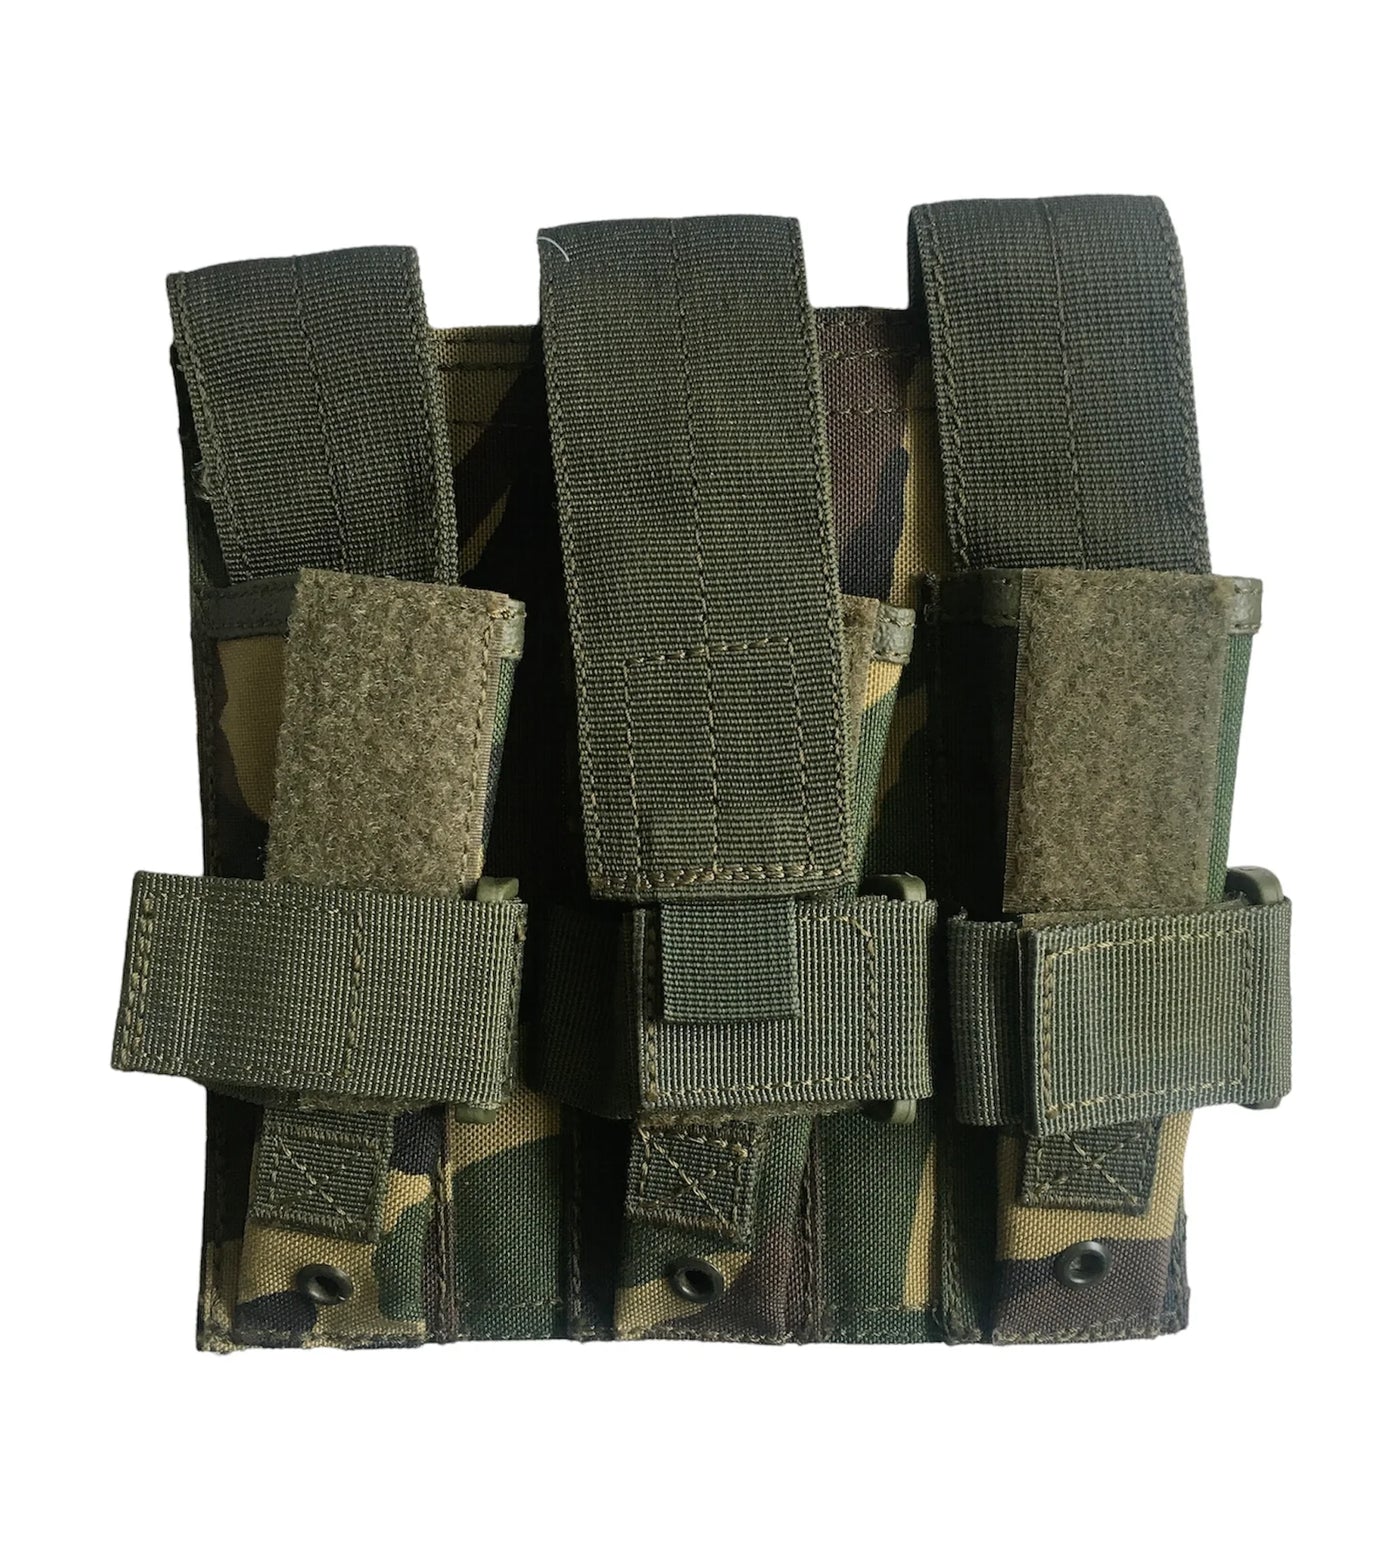 MP5 Magazine Pouch for Tactical Vest (British Disruptive Pattern Material - DPM)